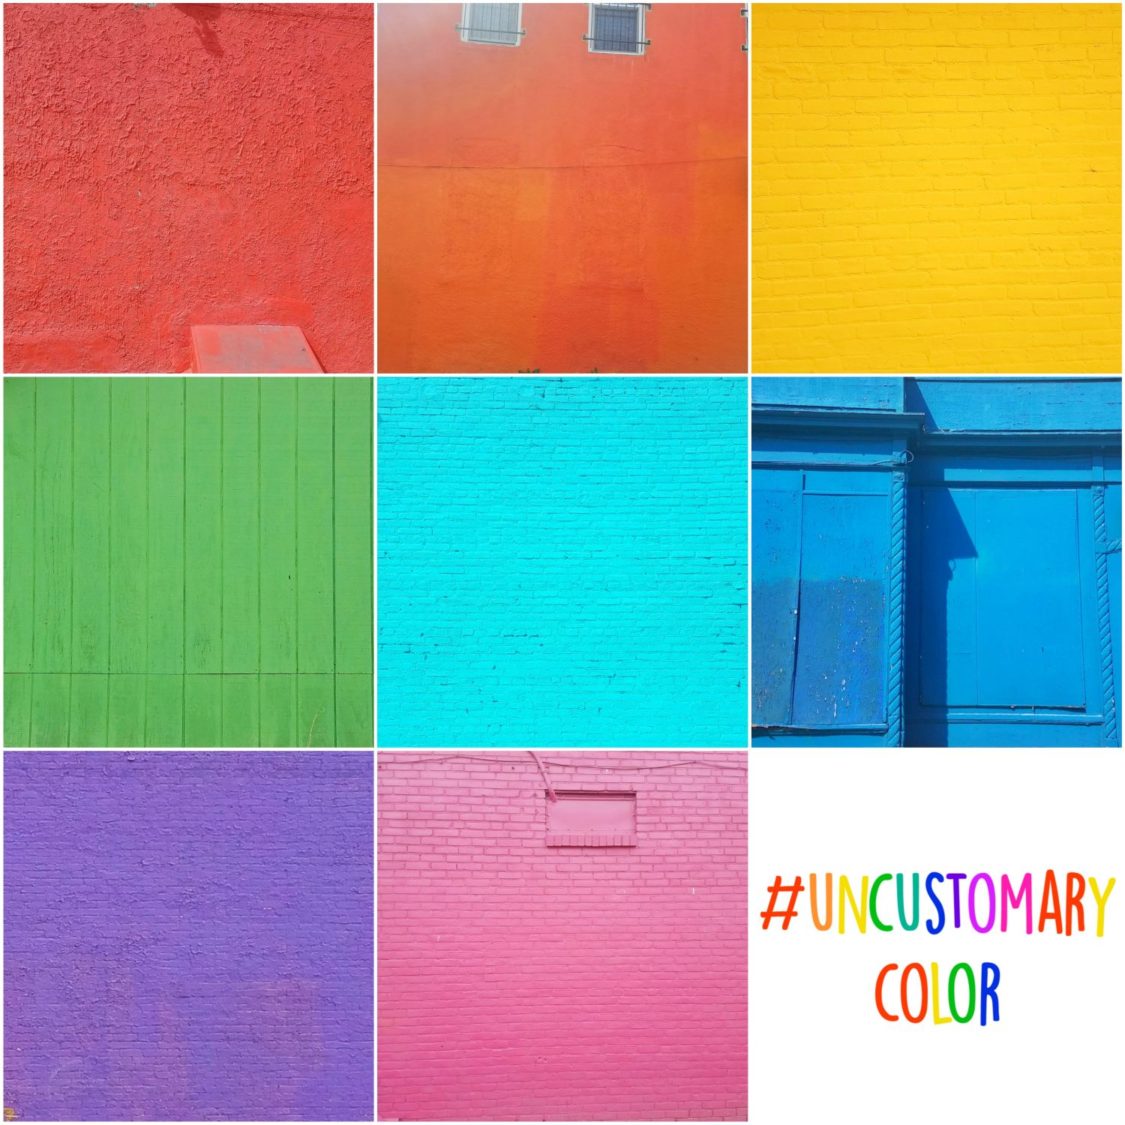 Colorful Walls Baltimore Collage